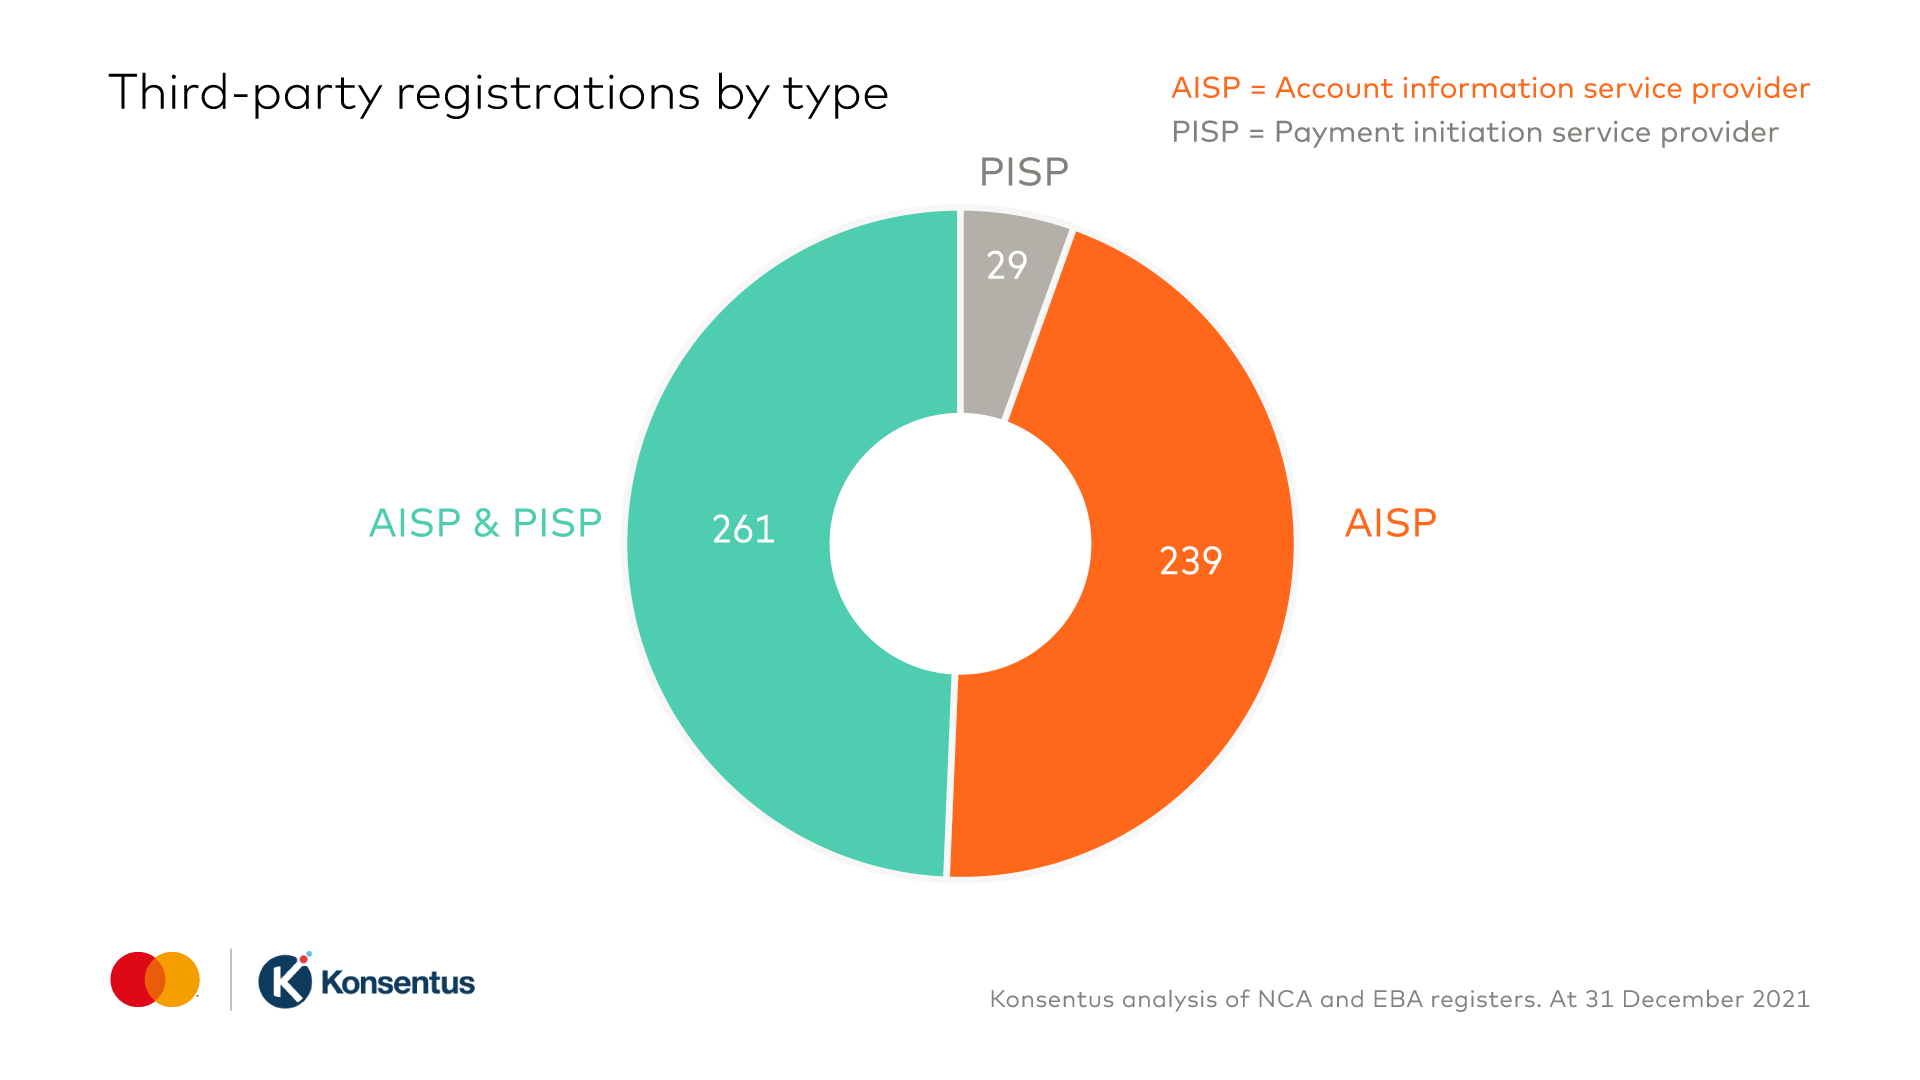 Third party registrations by type. 261 dual registrations, 239 AISP 29 PISP.